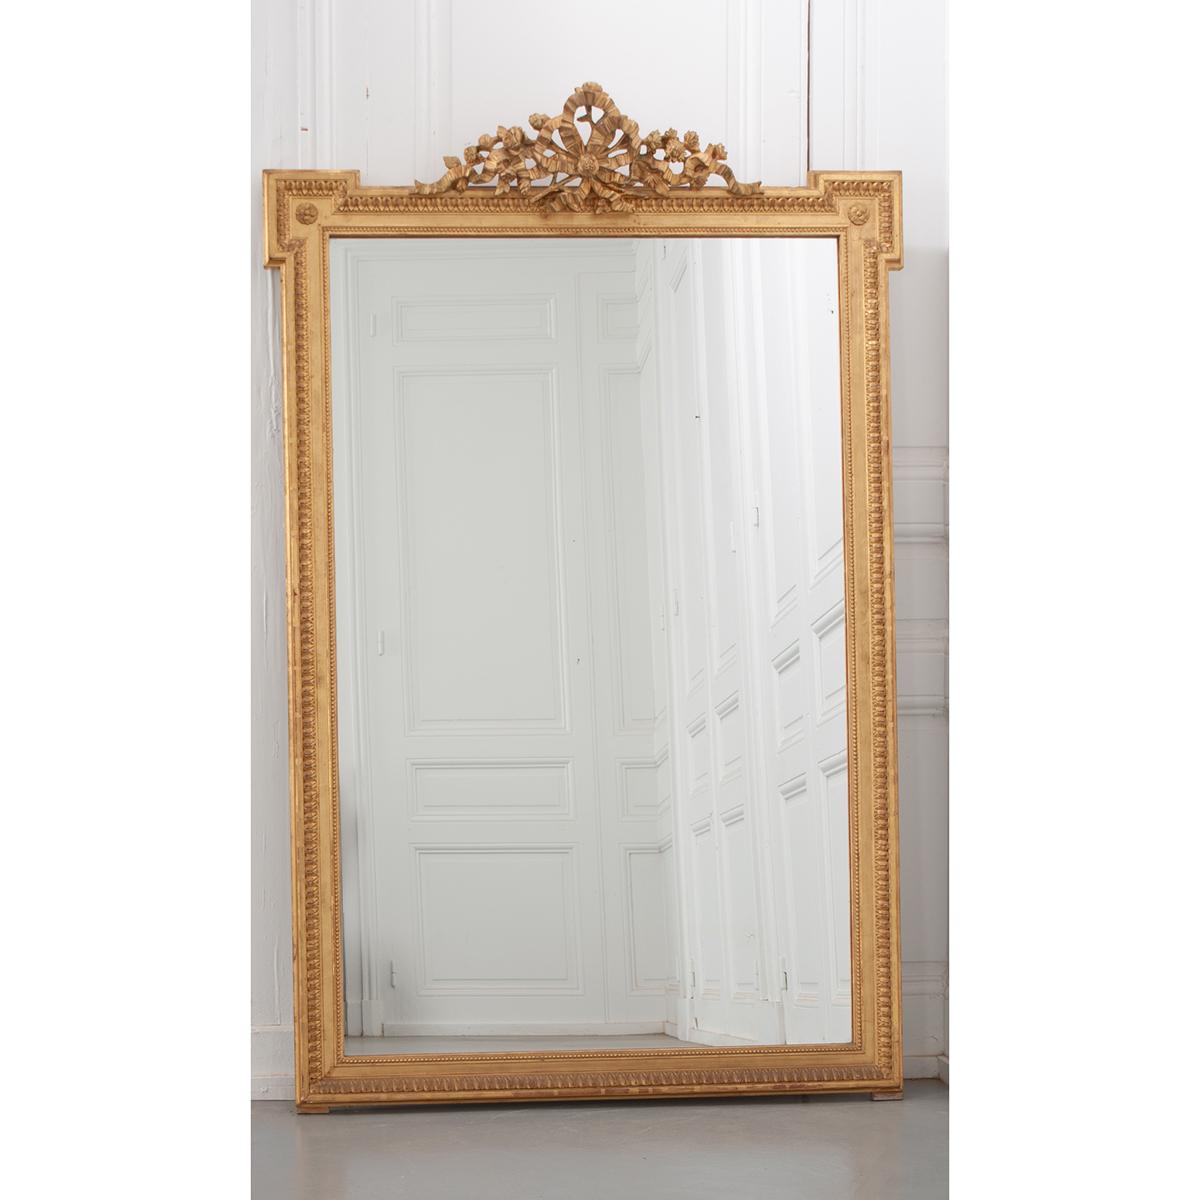 A French gold gilt Louis XVI style mirror with its original mirror plate. It has some aging. The crest is achieved with a large bow in the center and flowers entwined in the bow. It has a decorative edge. Be sure to view the detailed images.